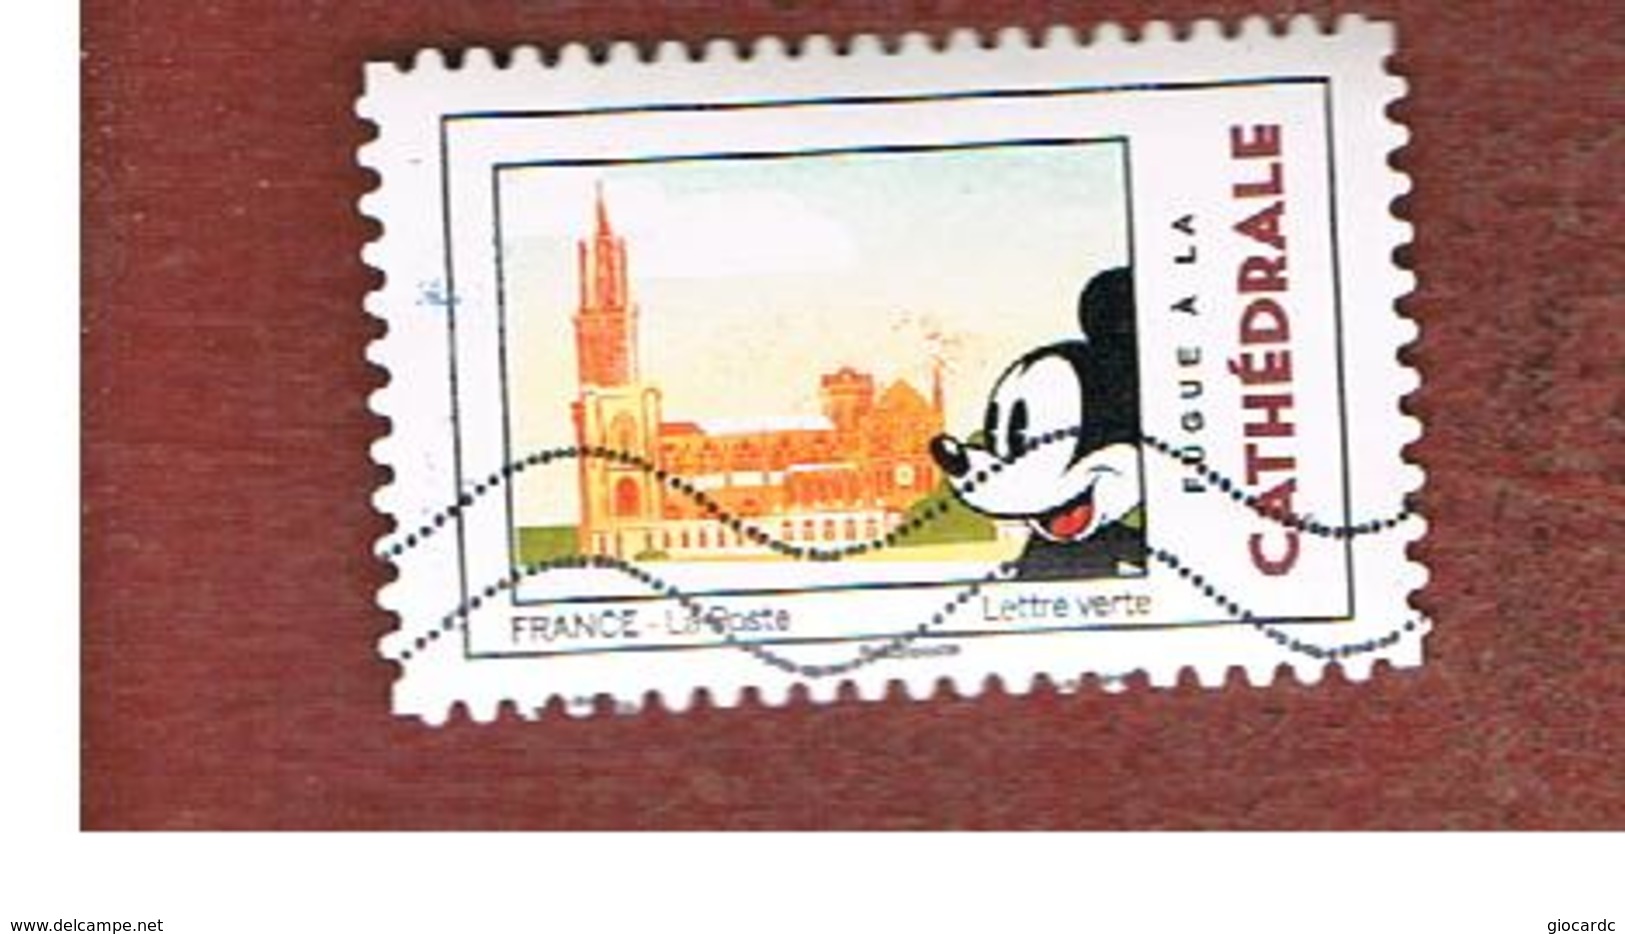 FRANCIA (FRANCE) - YV. A1593  - 2018 MICKEY MOUSE IN FRANCE: CATHEDRAL   - USED - Oblitérés